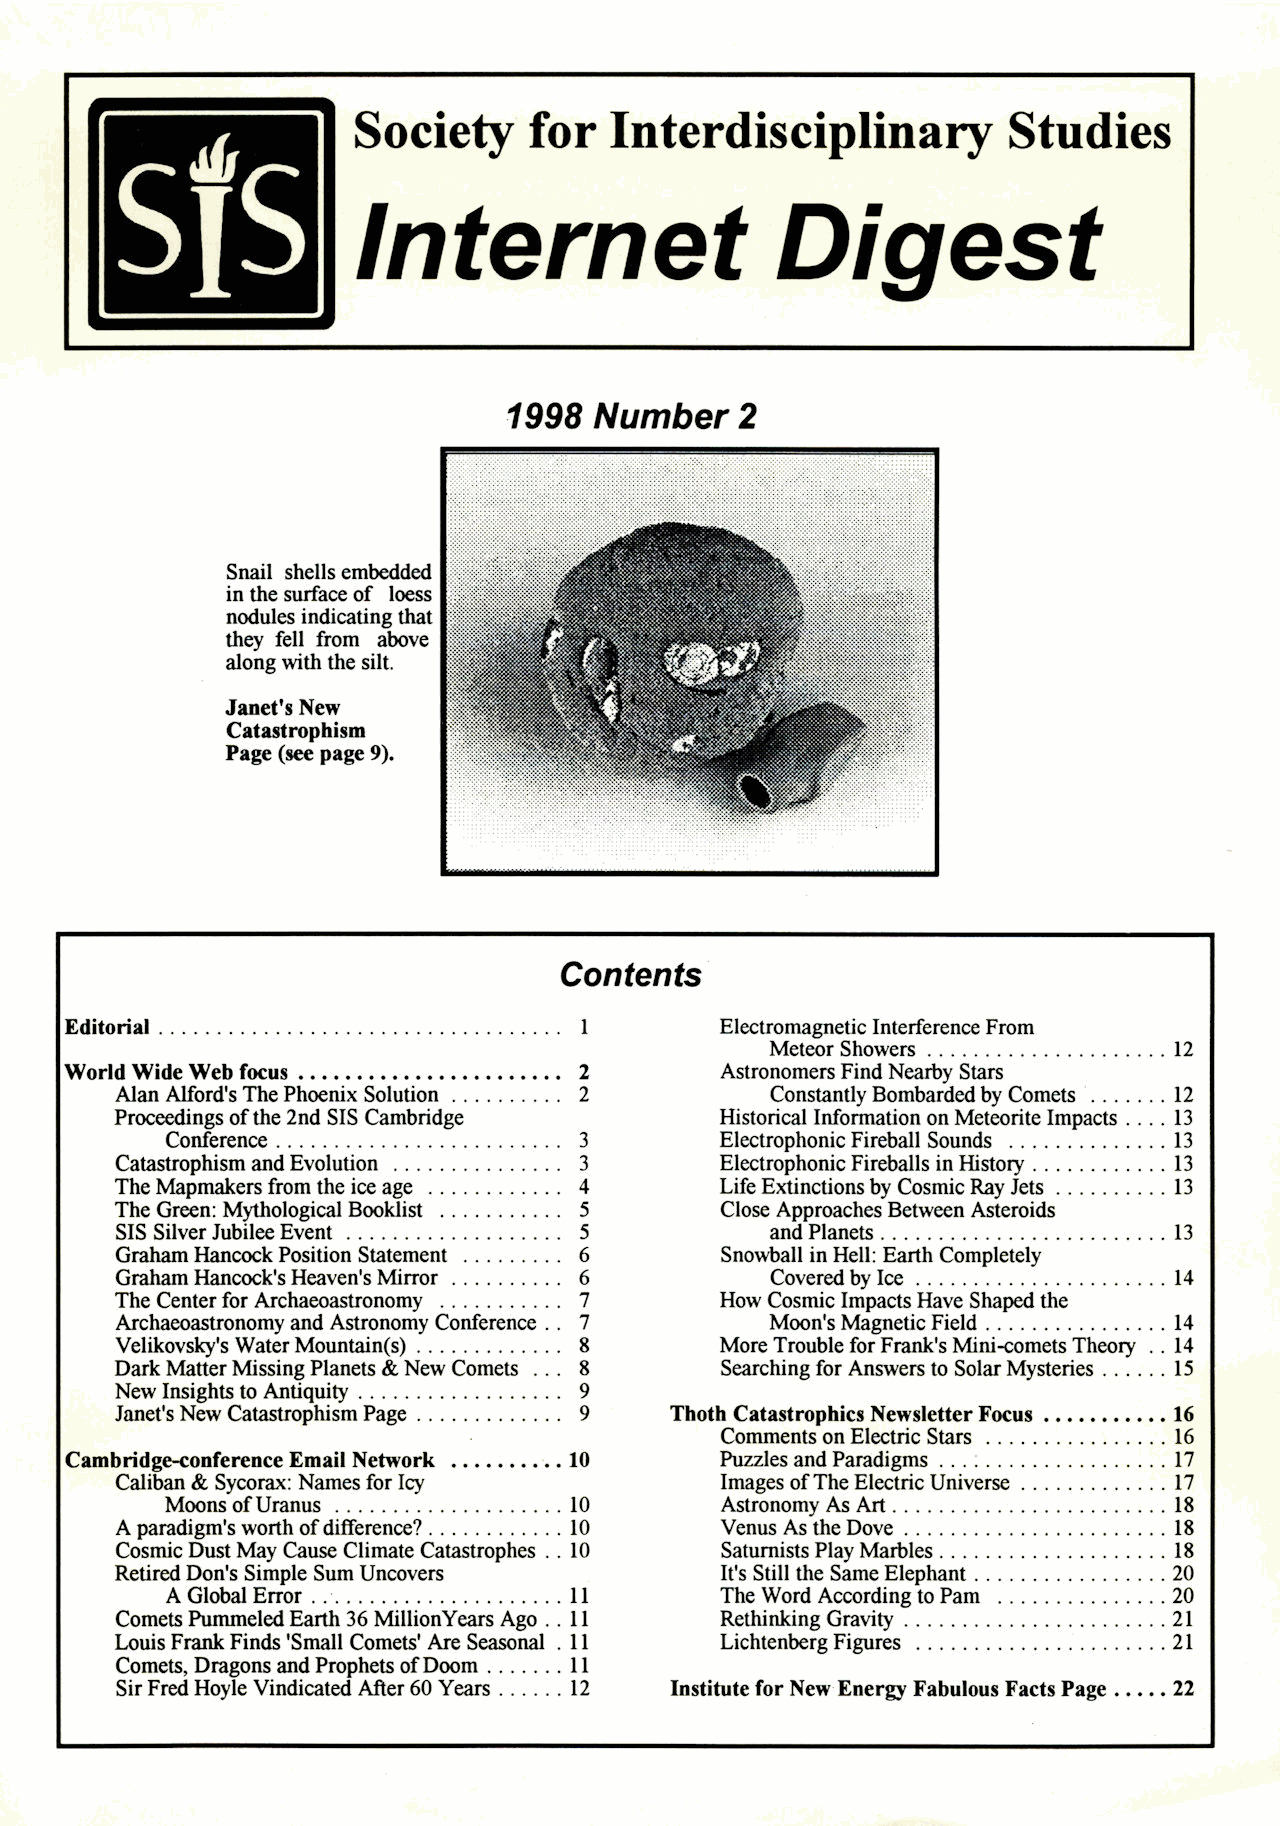 SIS Internet Digest 1998-2 cover